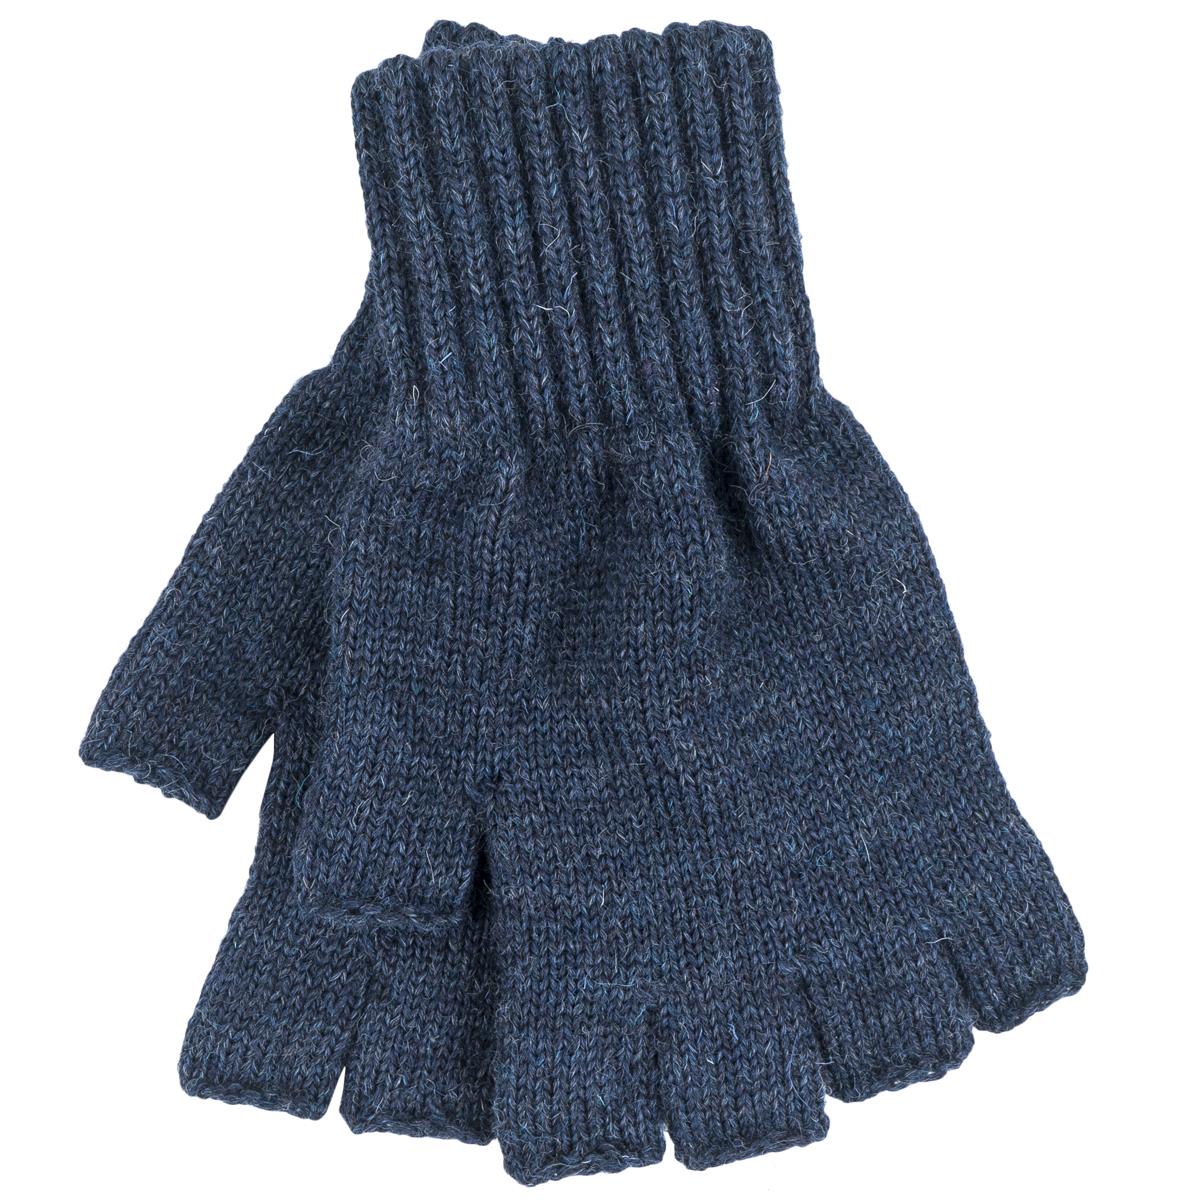 What colors & sizes of barbour fingerless gloves are offered?